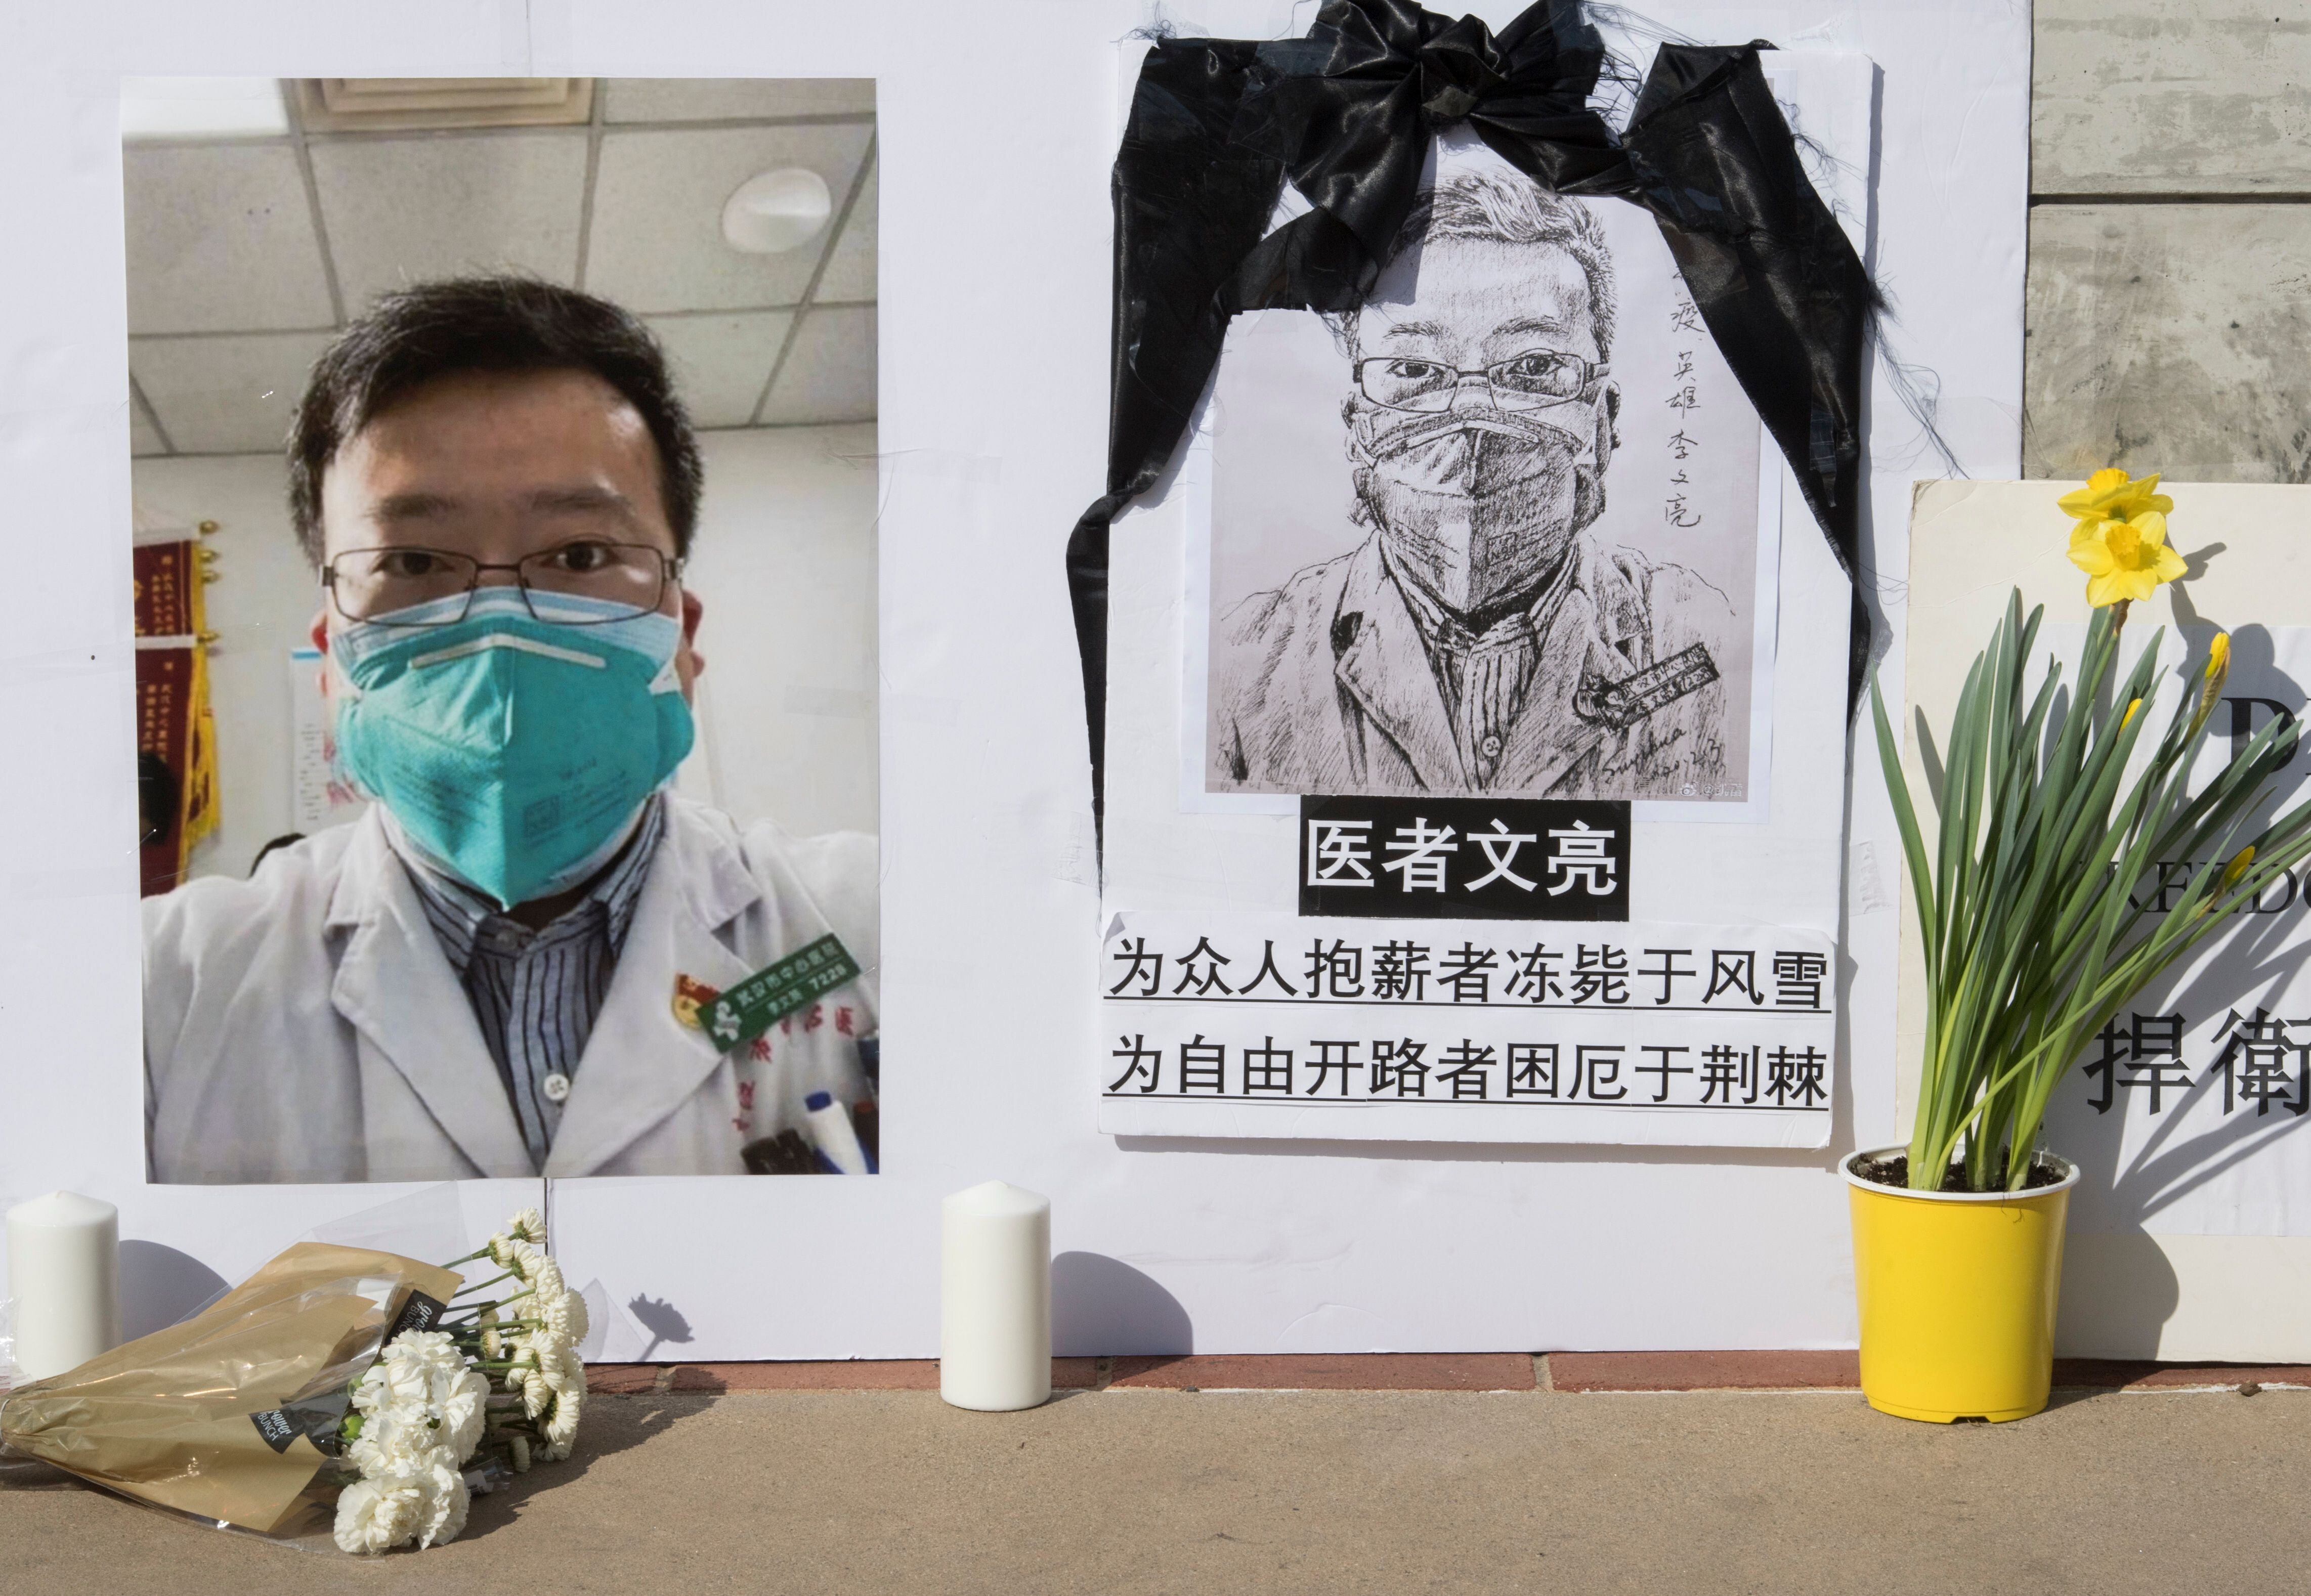 US lawmakers proposed renaming the street in front of China’s embassy after the late Wuhan doctor Li Wenliang. Photo: AFP